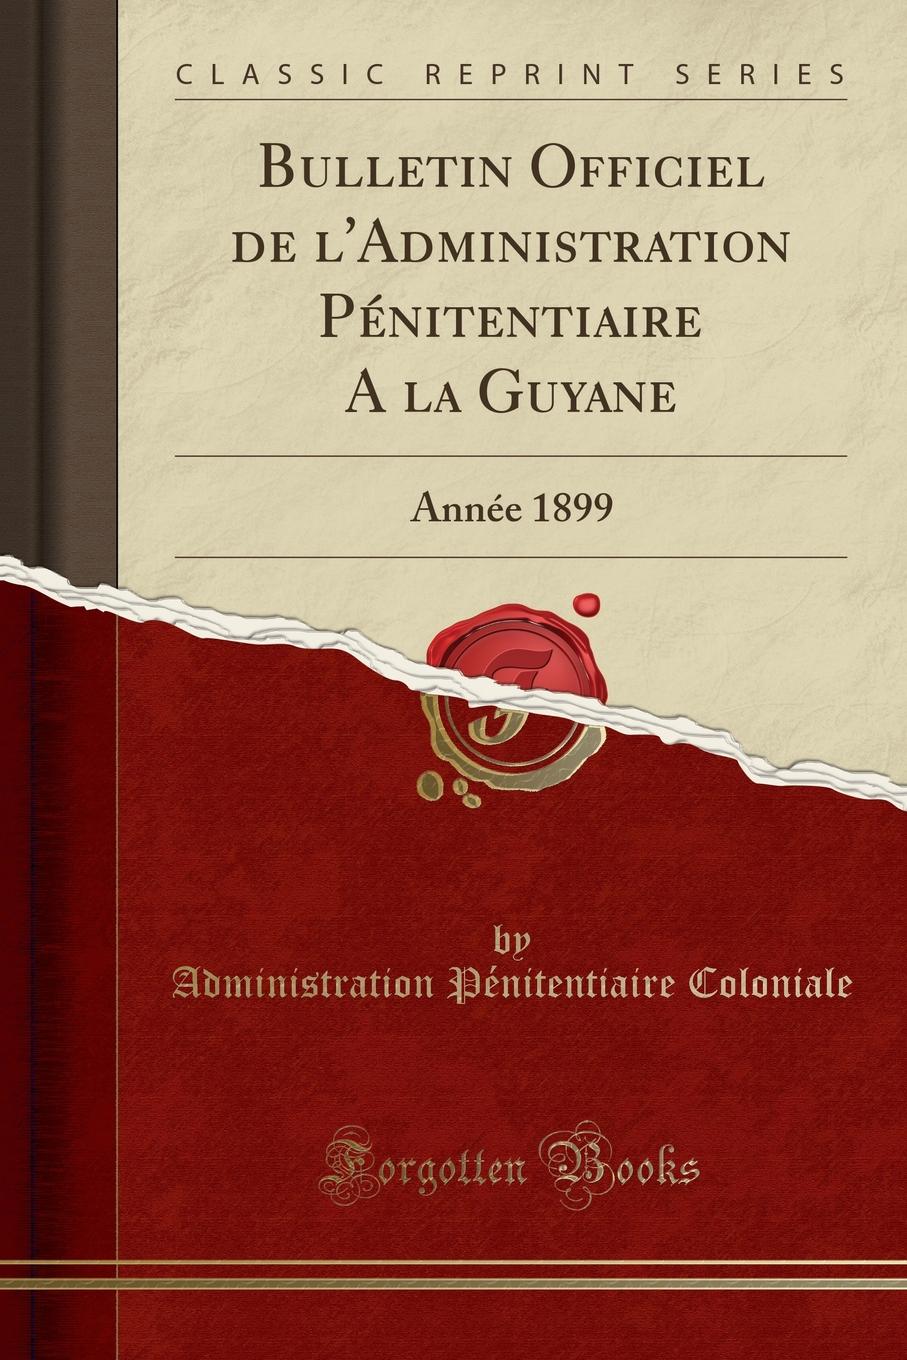 Administration Pénitentiaire Coloniale Bulletin Officiel de l.Administration Penitentiaire A la Guyane. Annee 1899 (Classic Reprint)